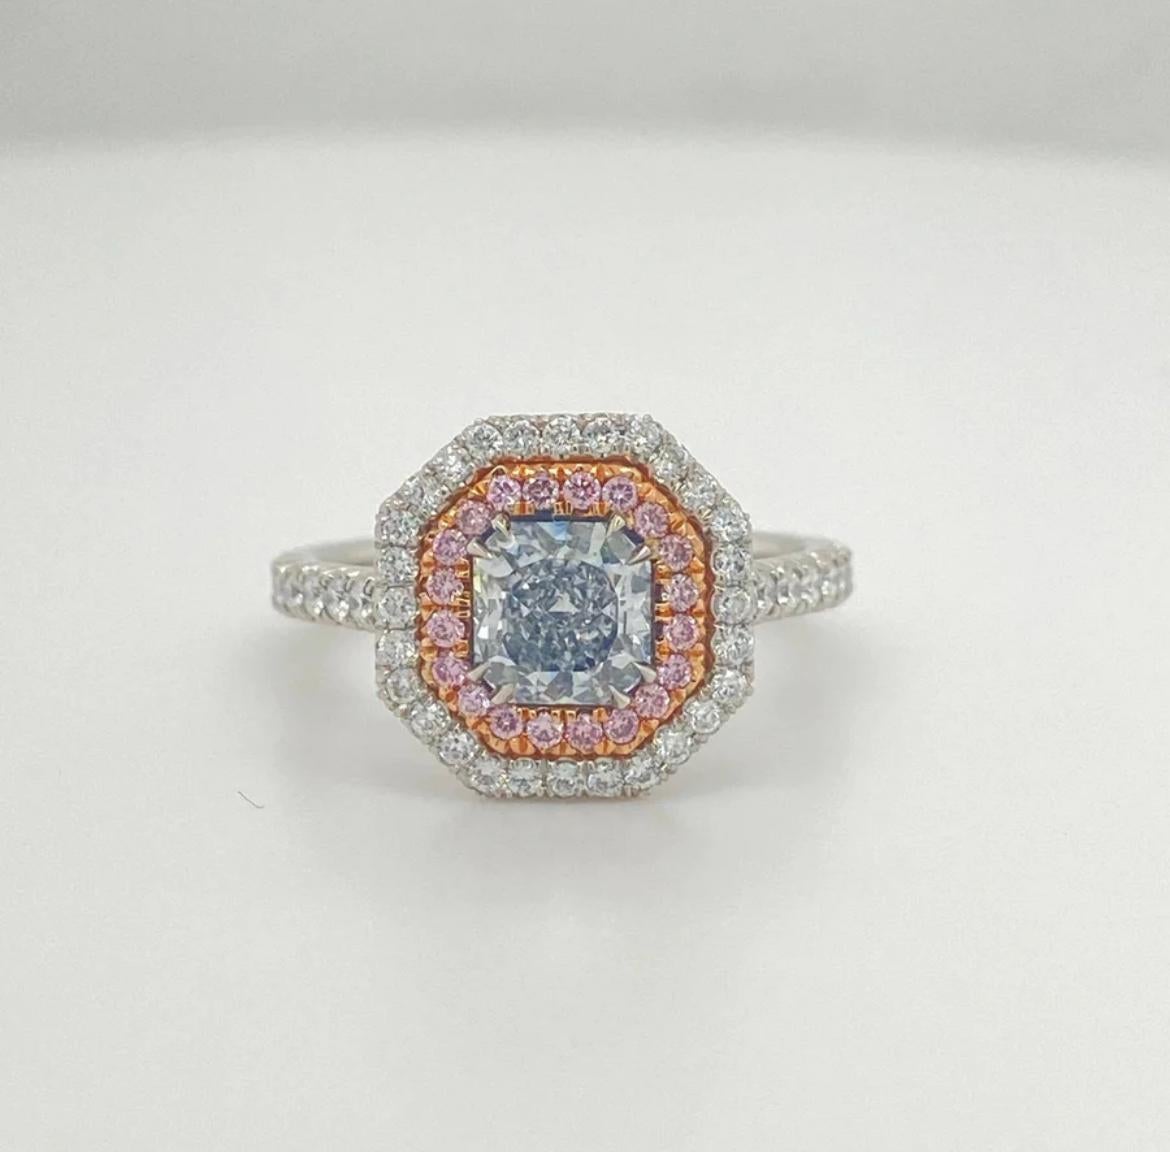 - GIA# 1176707212
- Platinum ring
- 0.12ct Fancy Pink Diamonds & 0.40ct White Diamonds
- 0.85ct Light Blue Radiant
- Ring Size 6 (can be sized)